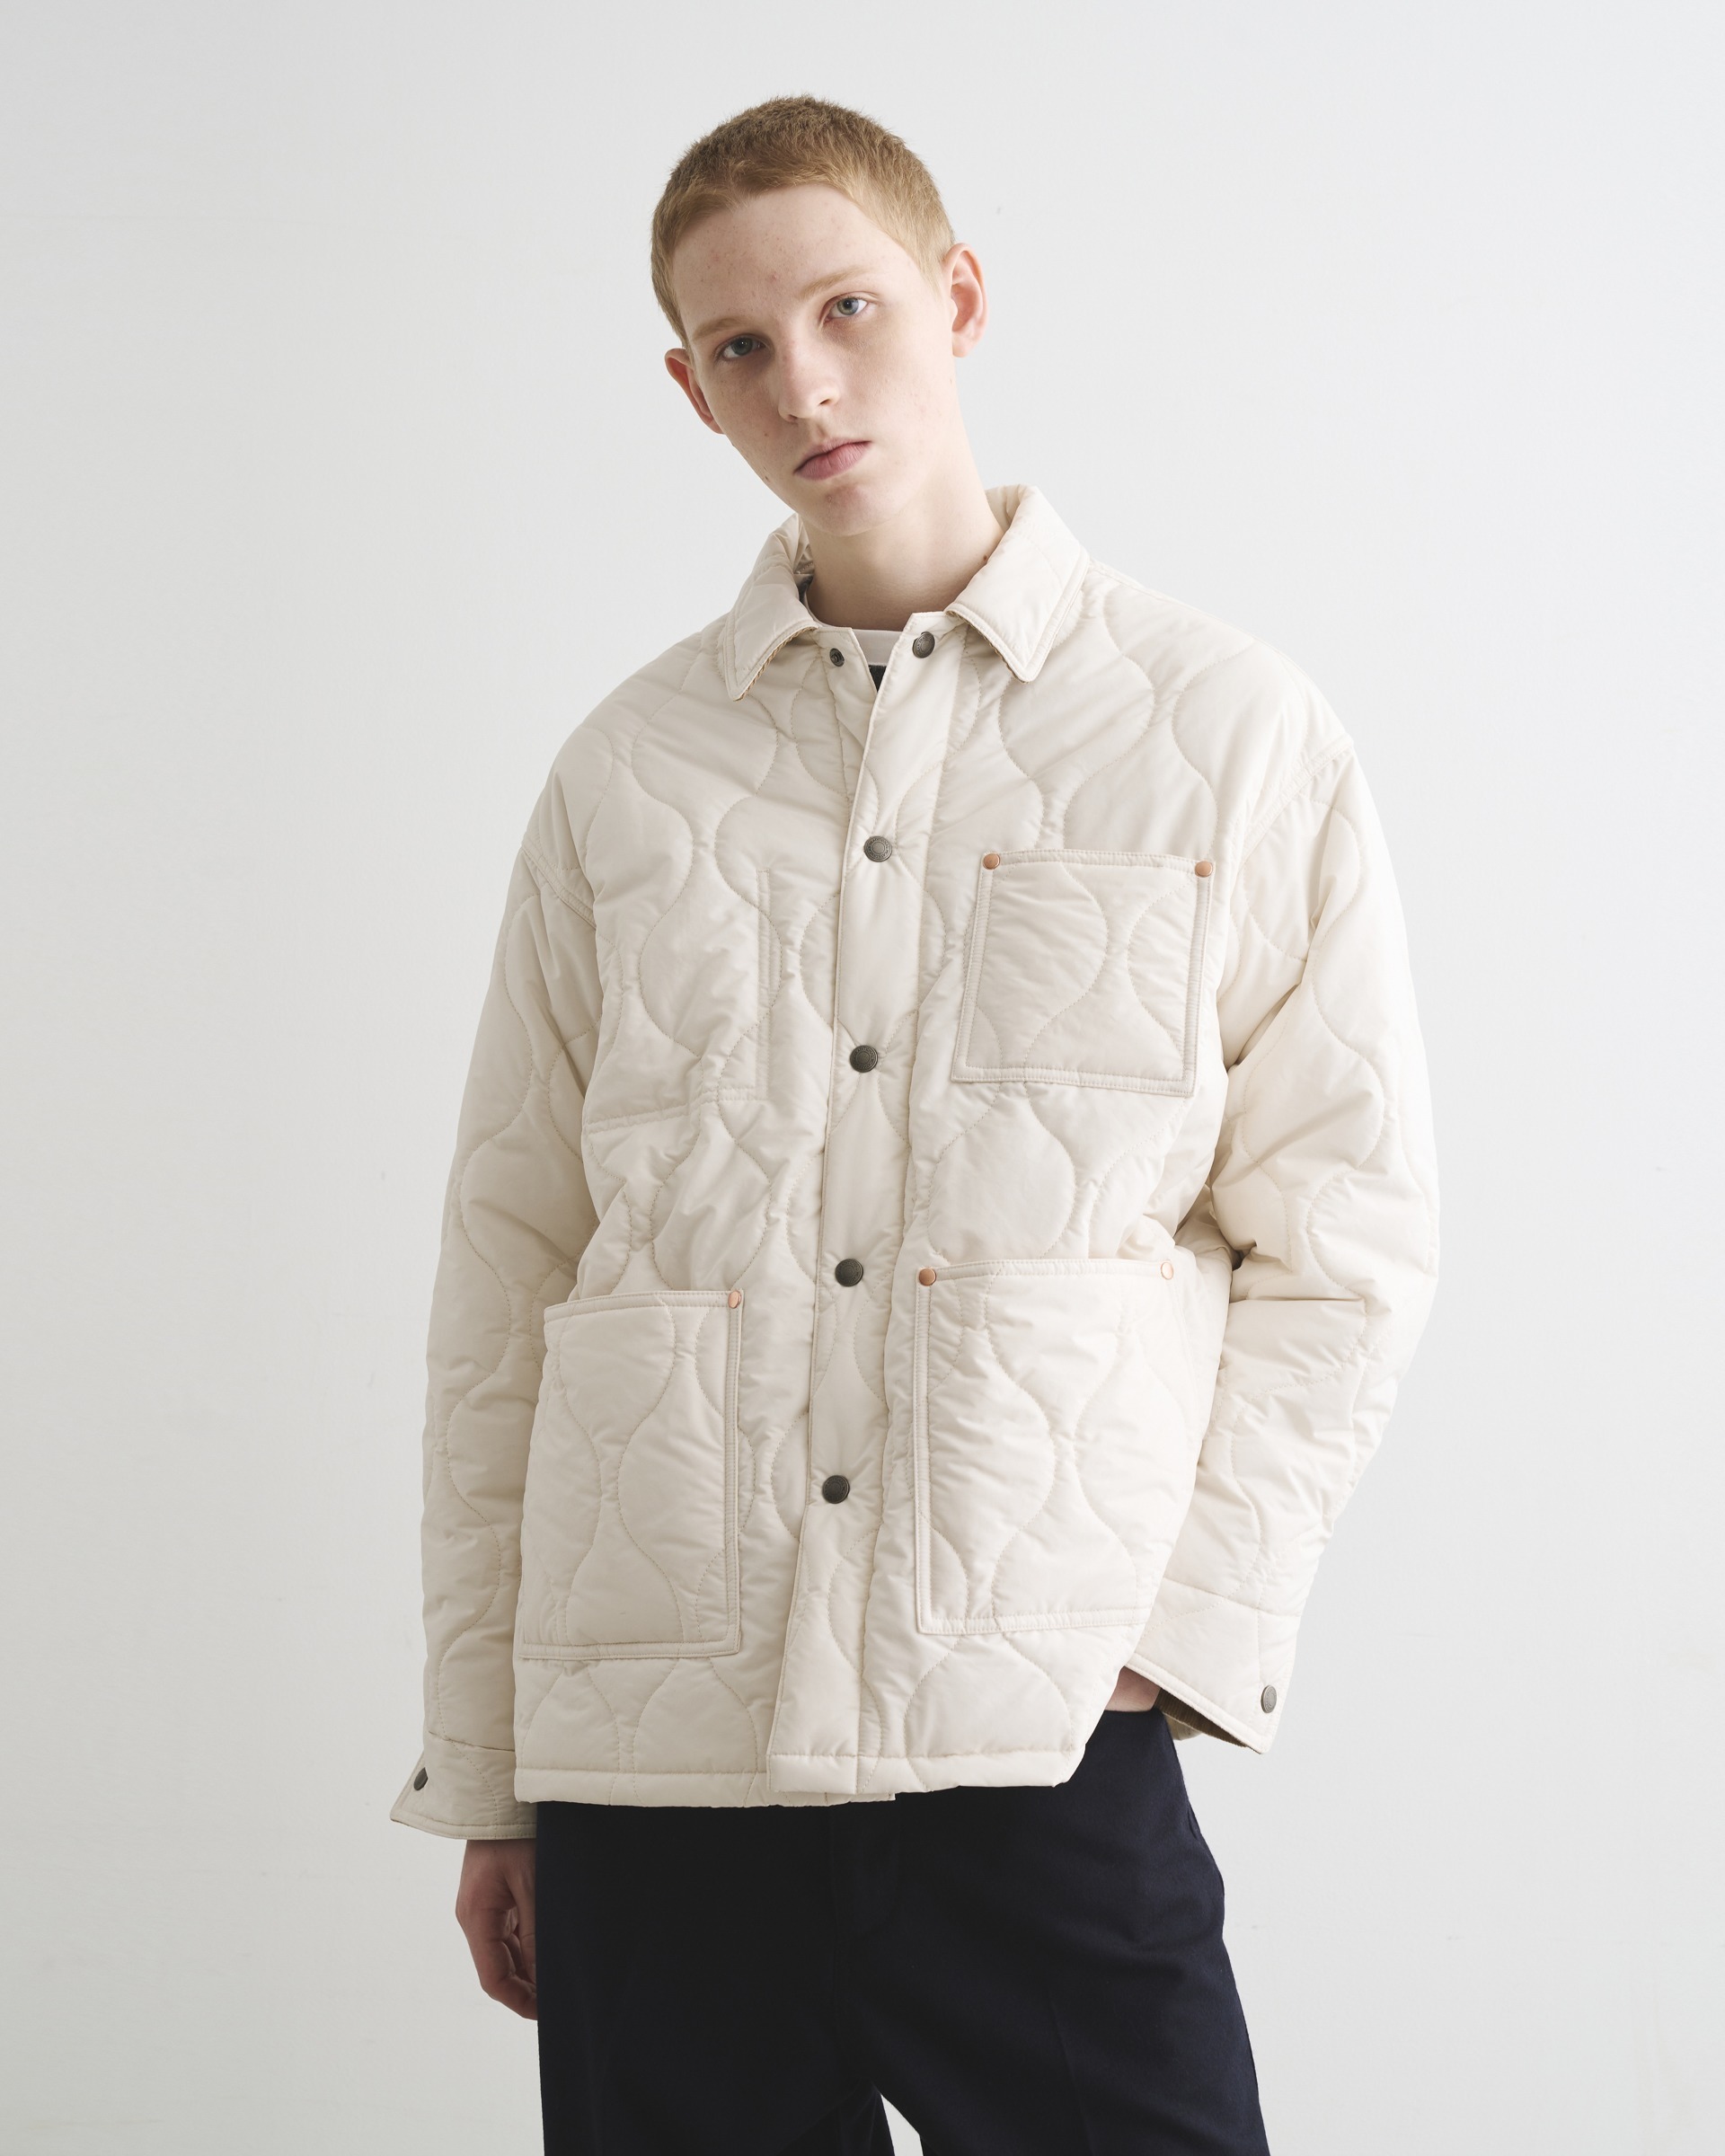 UNIONWEAR】QUILTED JACKET 002-L キルテッドジャケット 002 ロング 